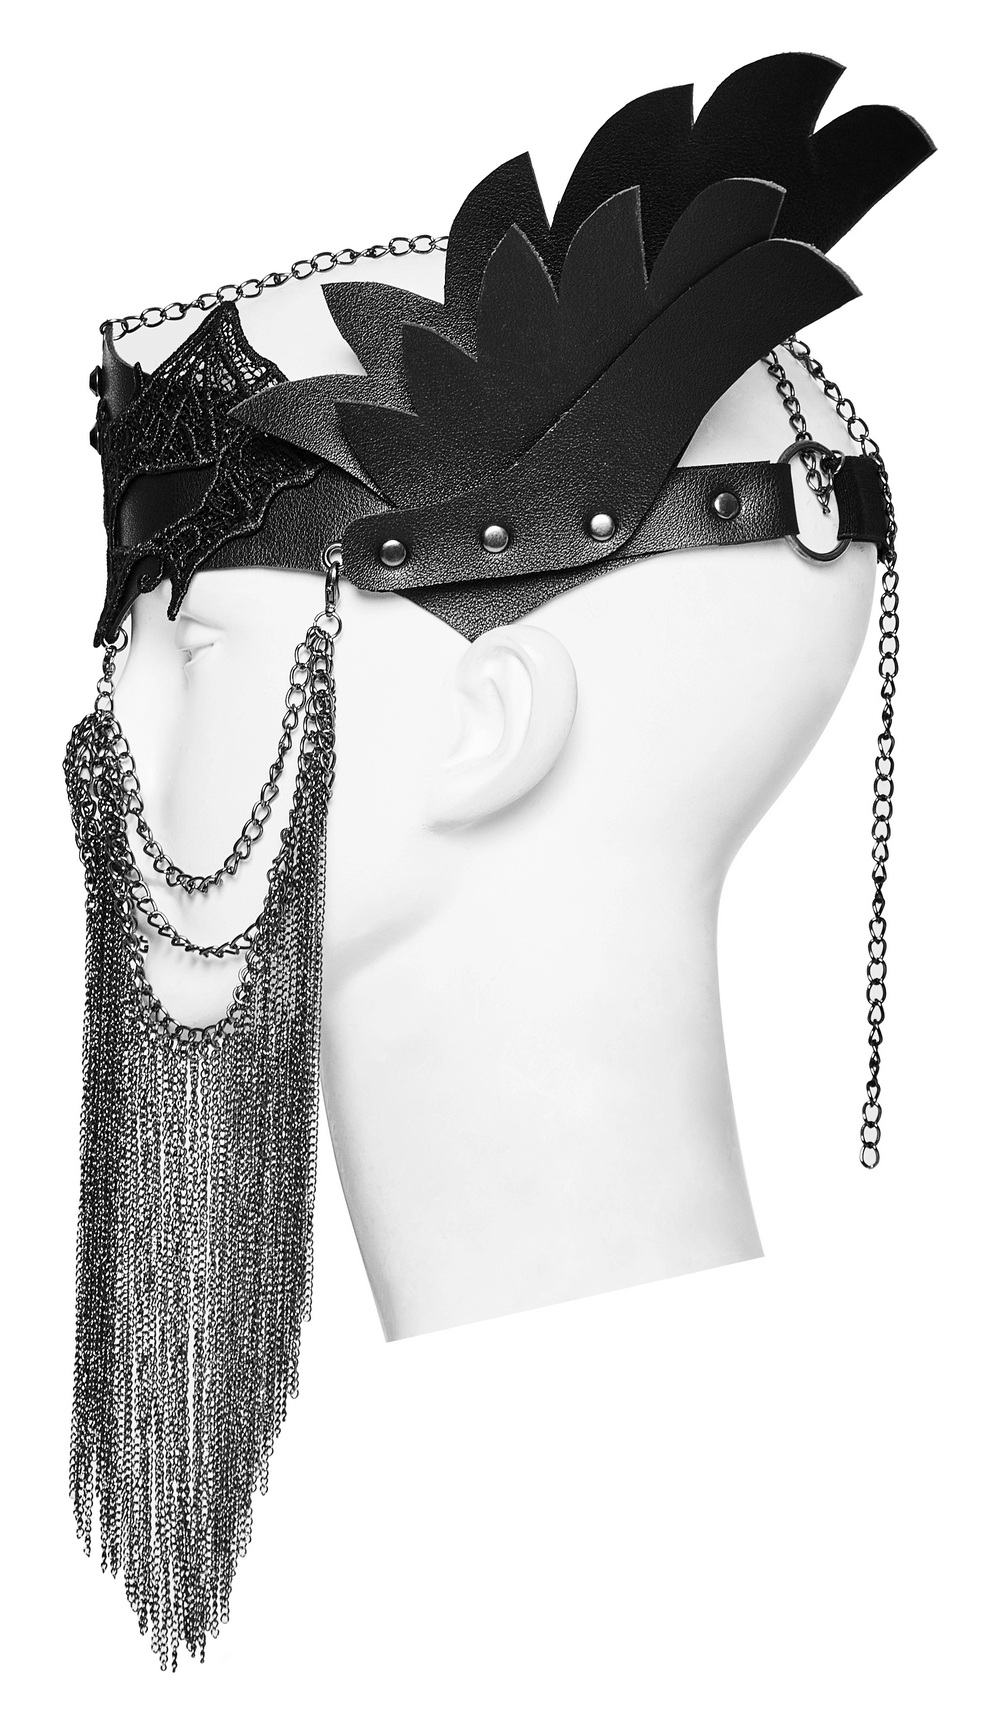 Gothic Punk Lace and Leather Mask with Wing Accents